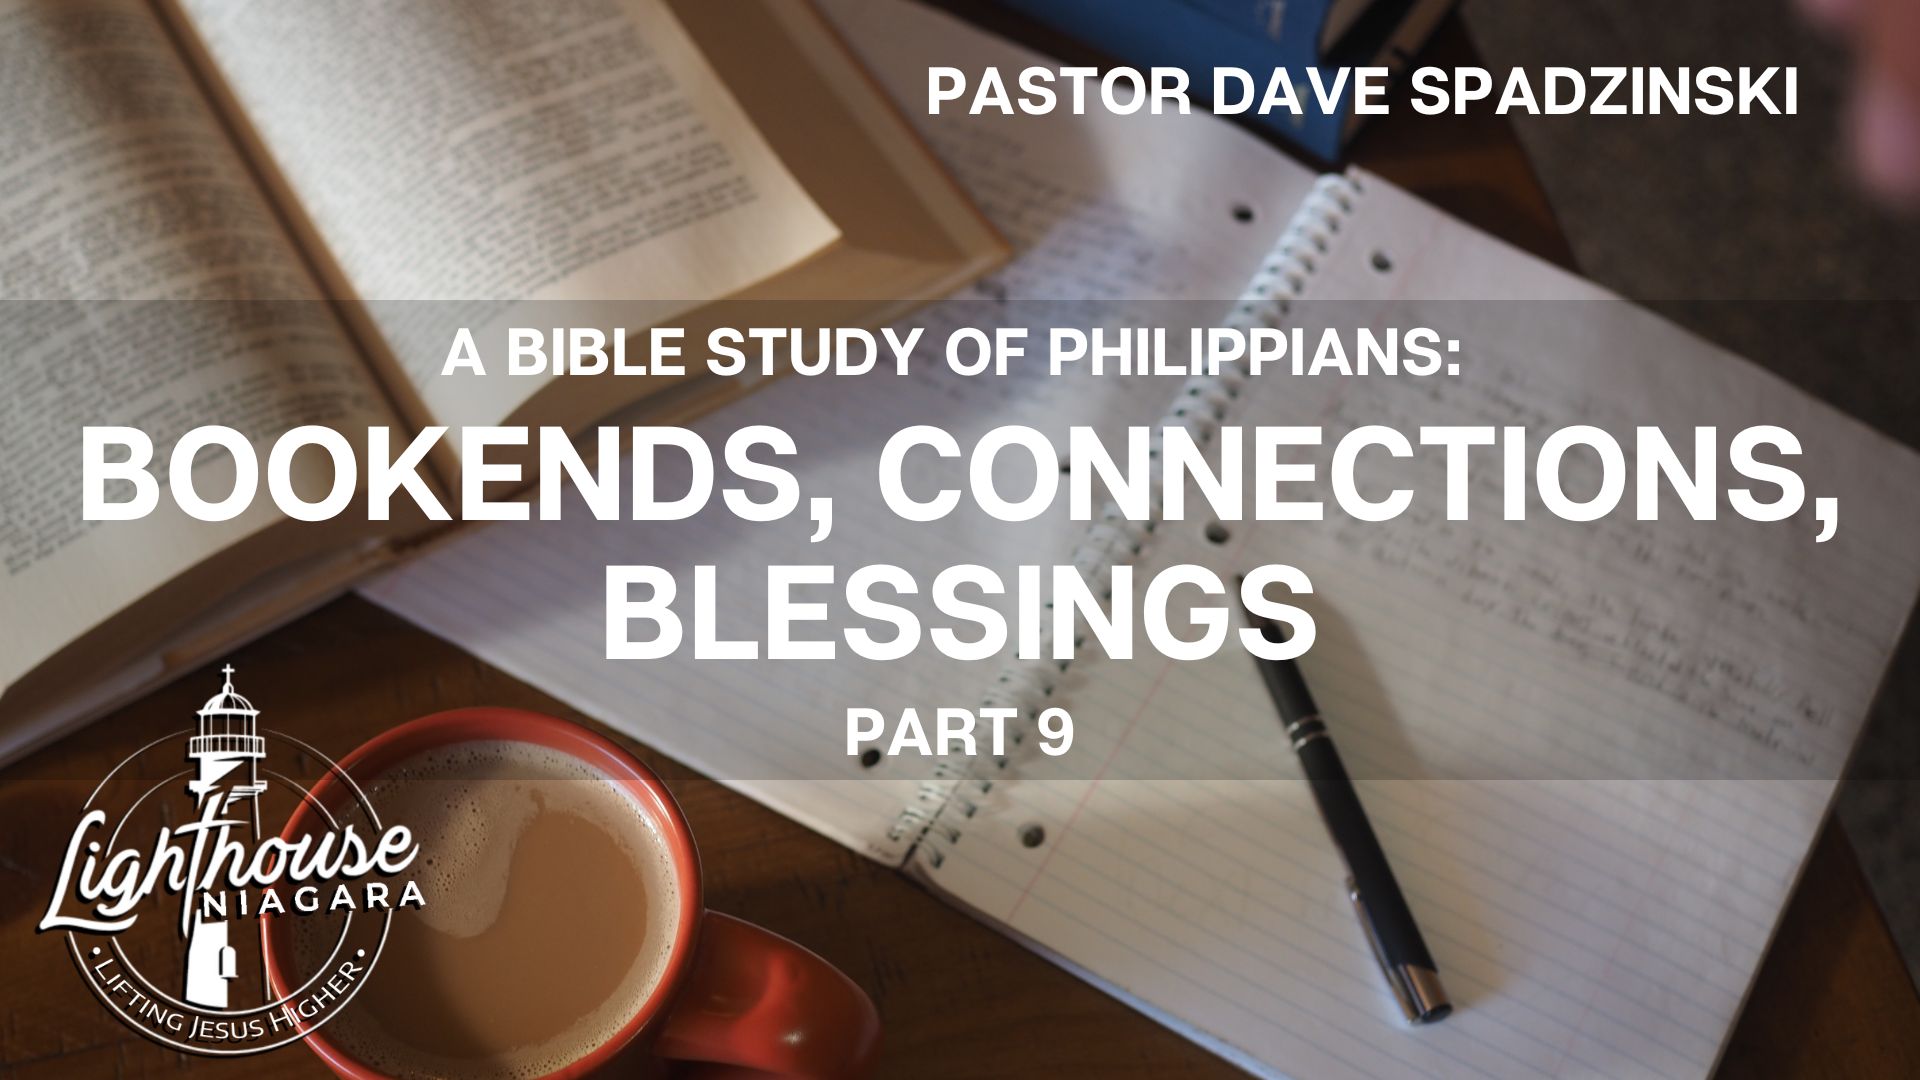 A Bible Study Of Philippians: Bookends, Connections, Blessings - Pastor Dave Spadzinski